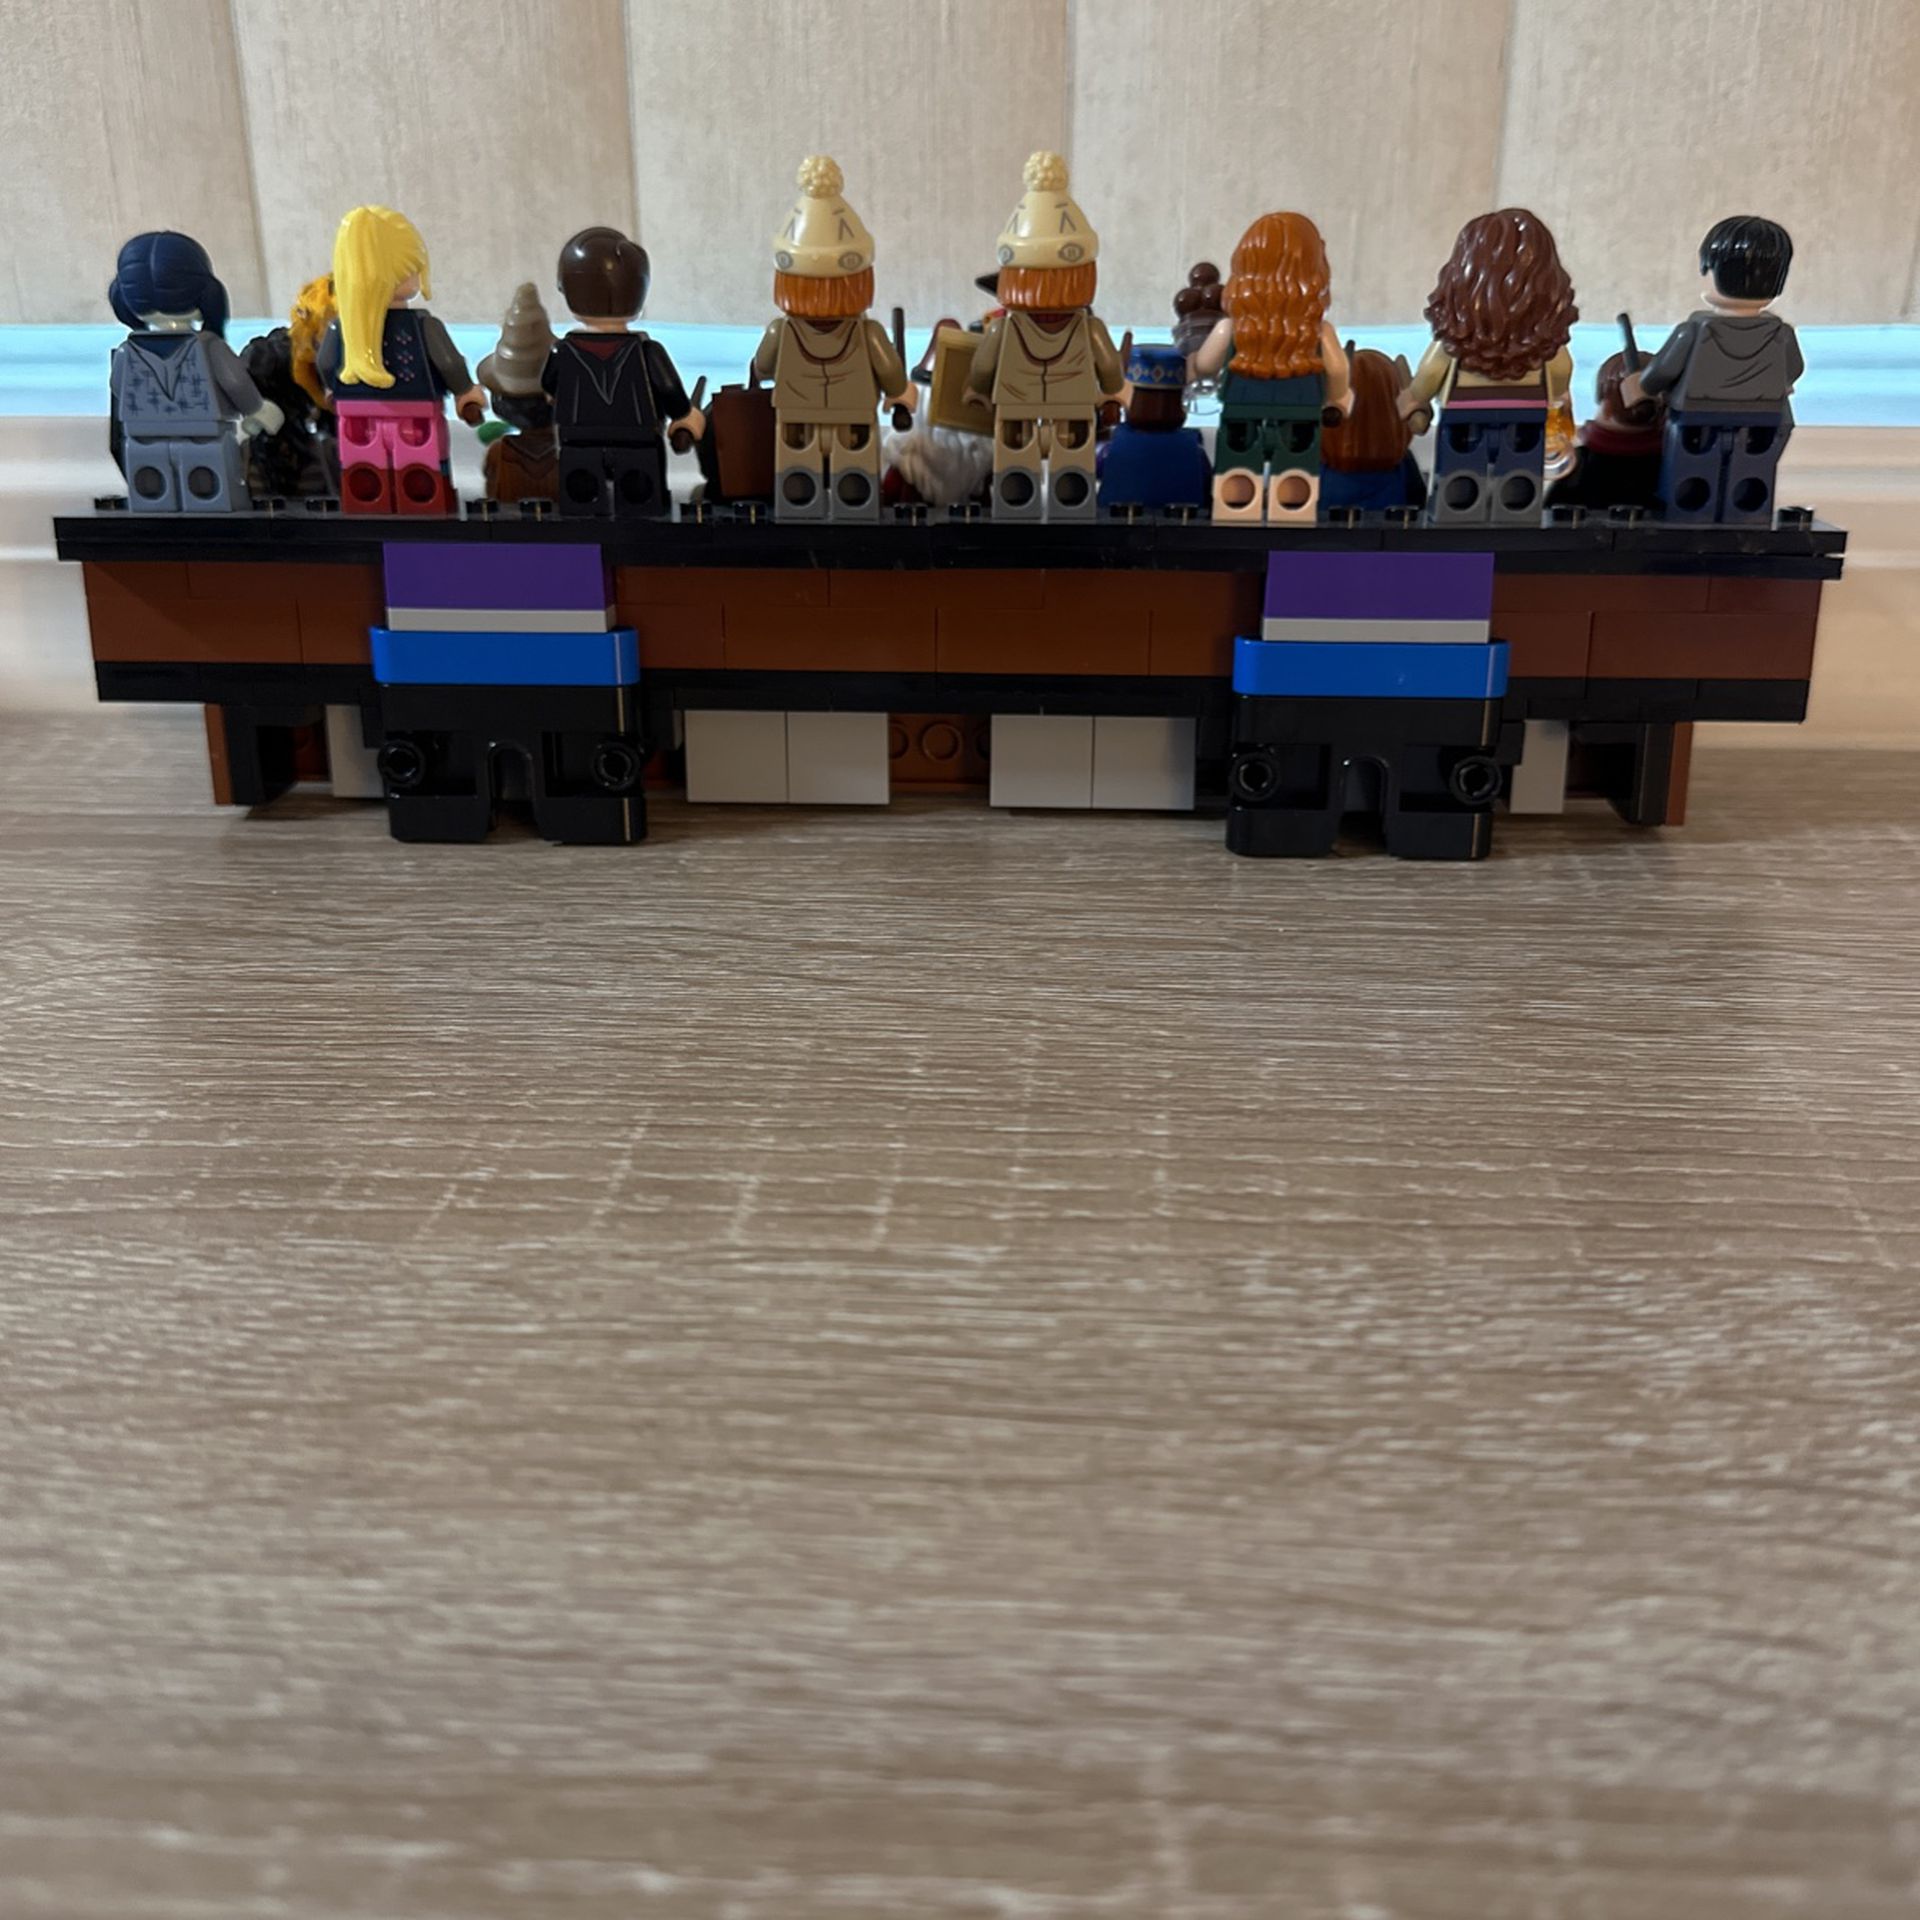 Harry Potter Lego Minifigs Series 2